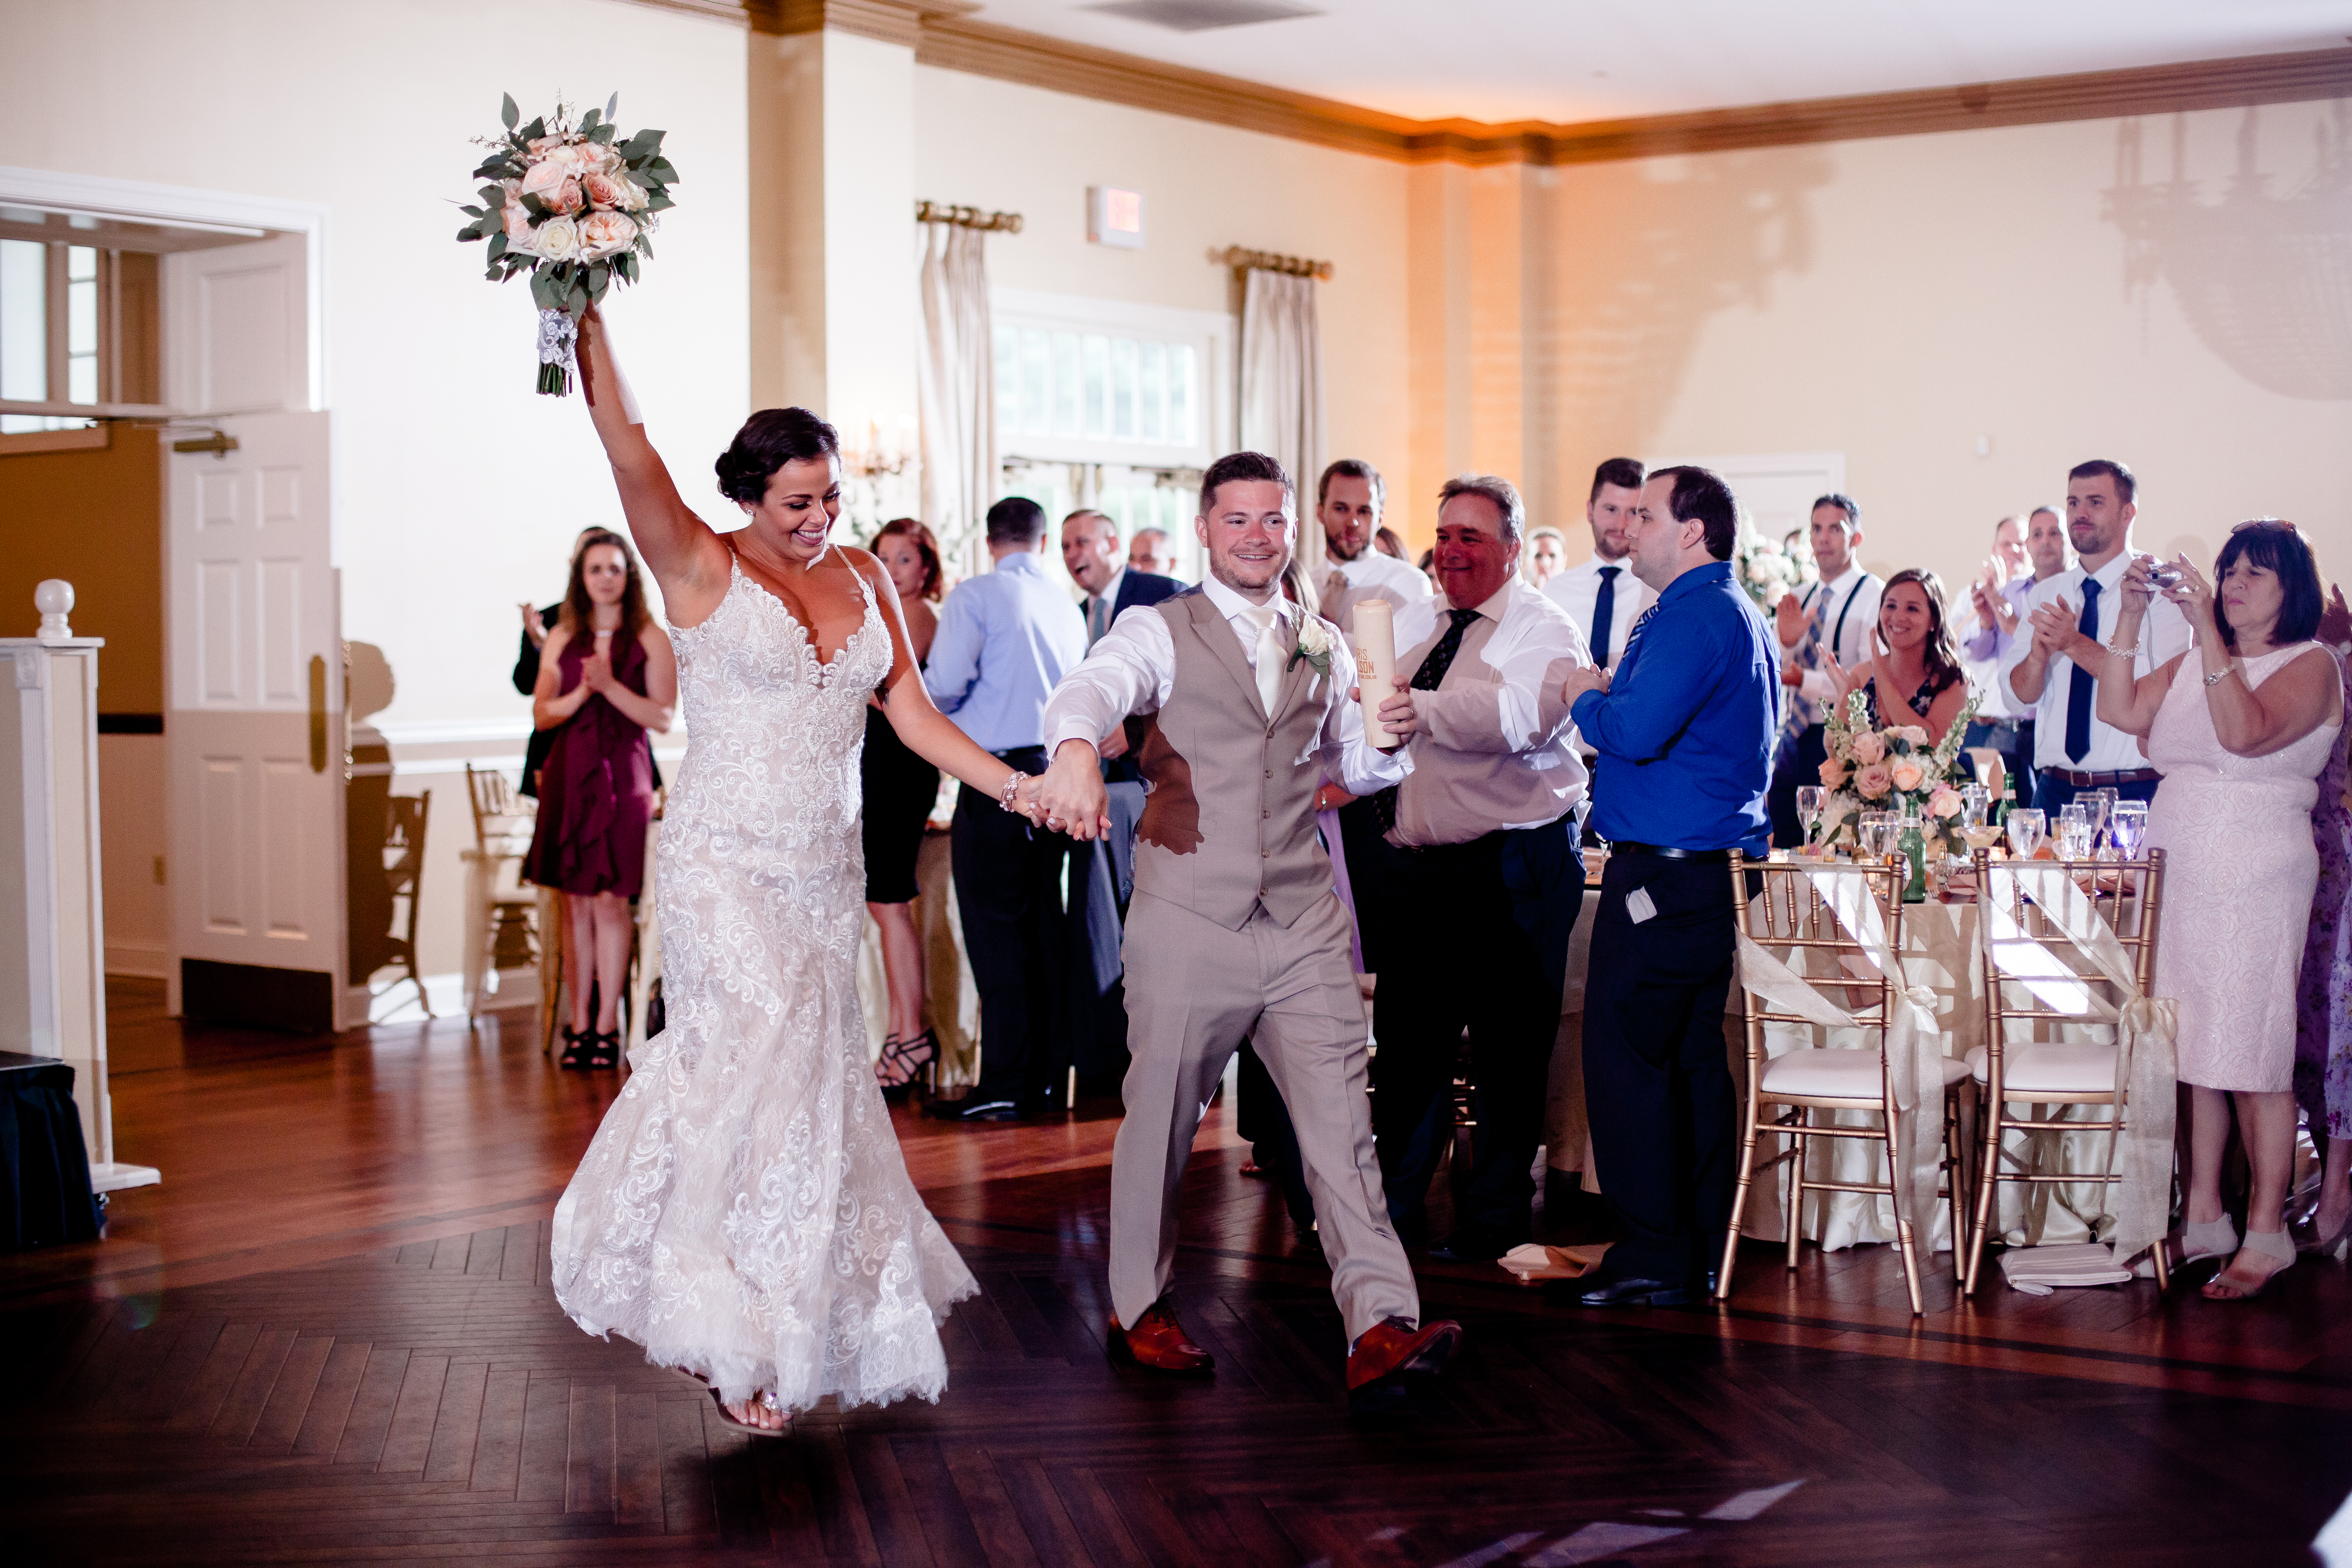 wedding entertainment pricing in NJ 